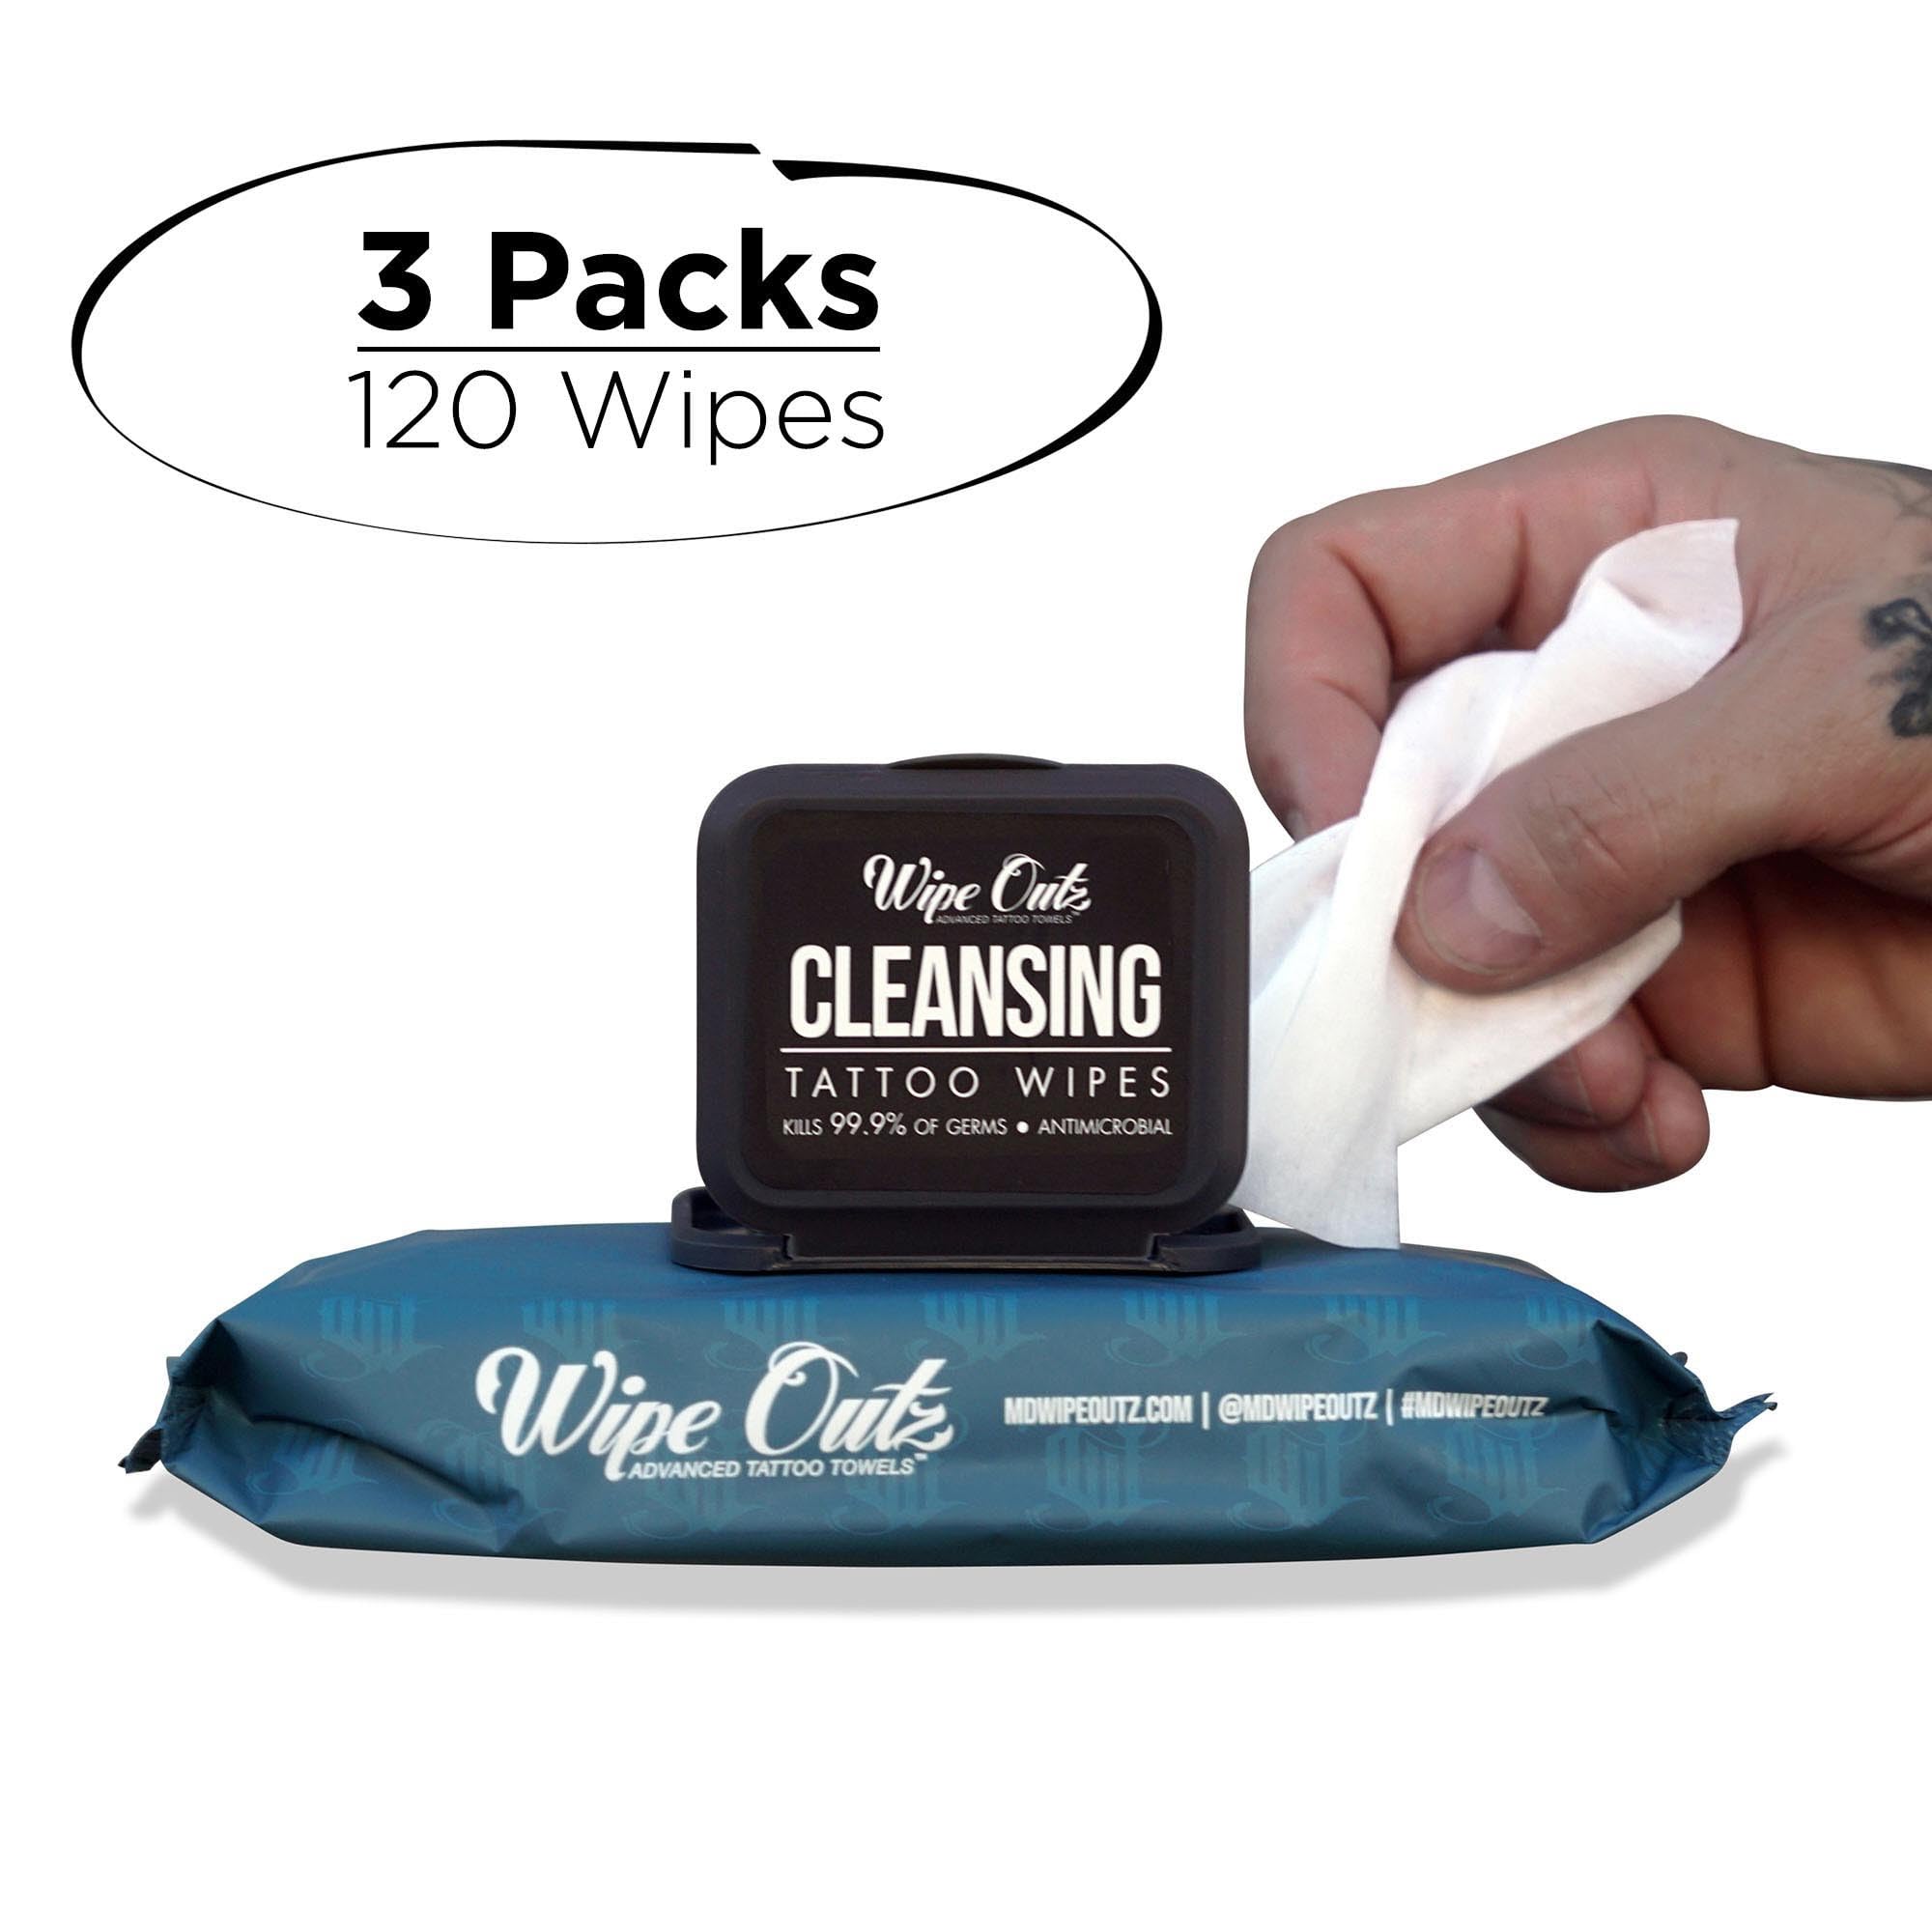 Wipe Outz Cleansing Tattoo Wipes for During Tattooing & Tattoo After Care, All in One Tattoo Cleaning Wipes to Clean Skin, Alcohol Free Tattoo Green Soap Wipes for Tattooing, 120-Count (3 Pack)